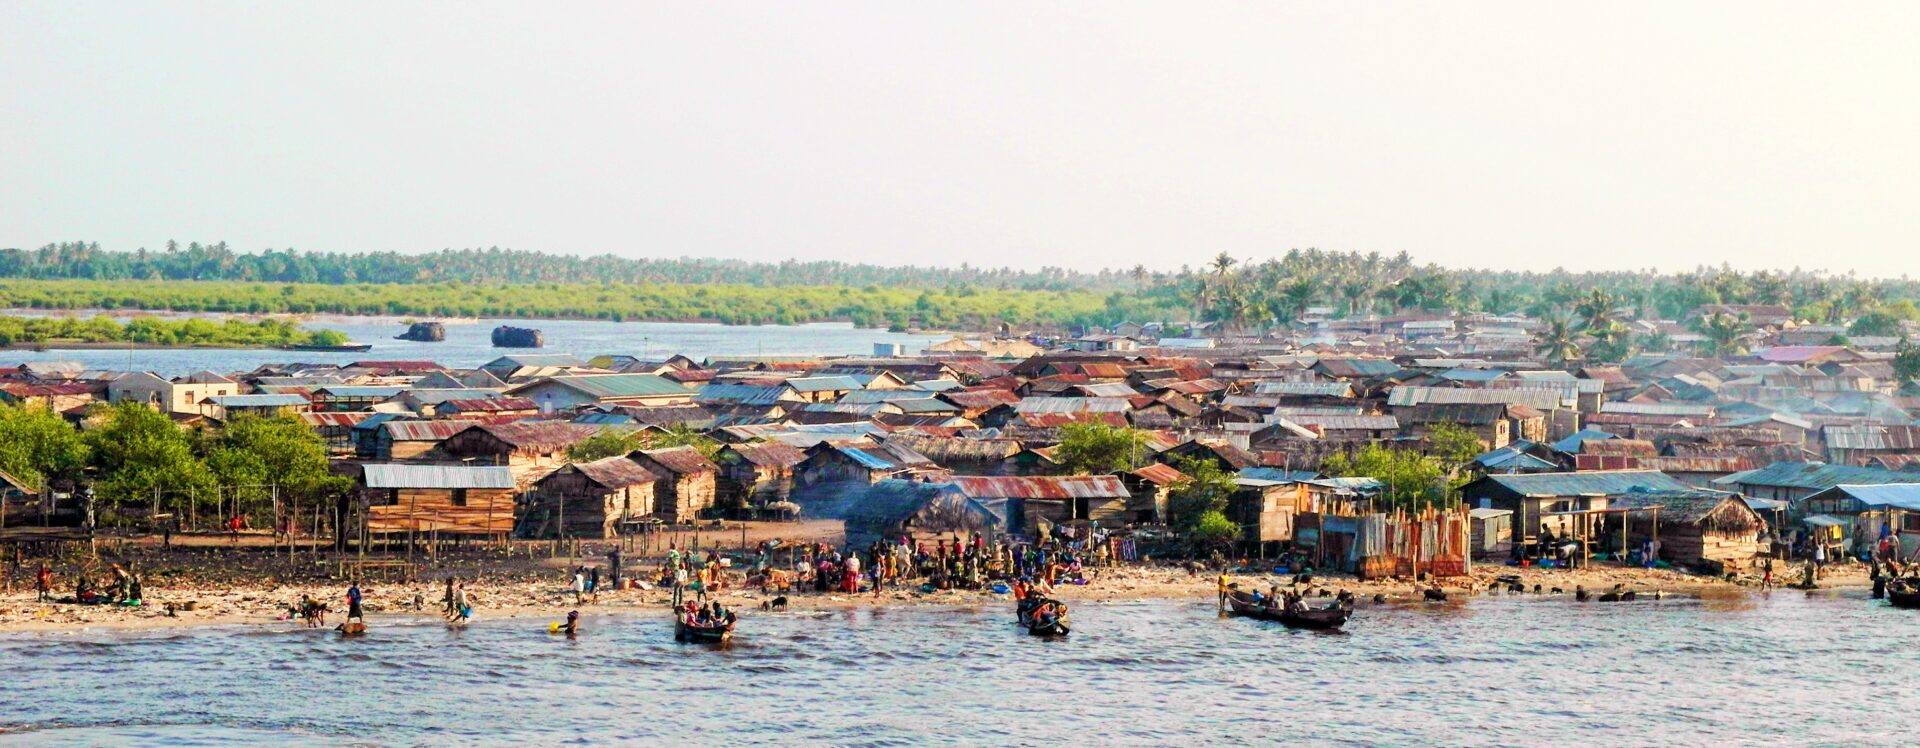 An image of a large town in Lagos beside a lagoon with several small ships in the water.